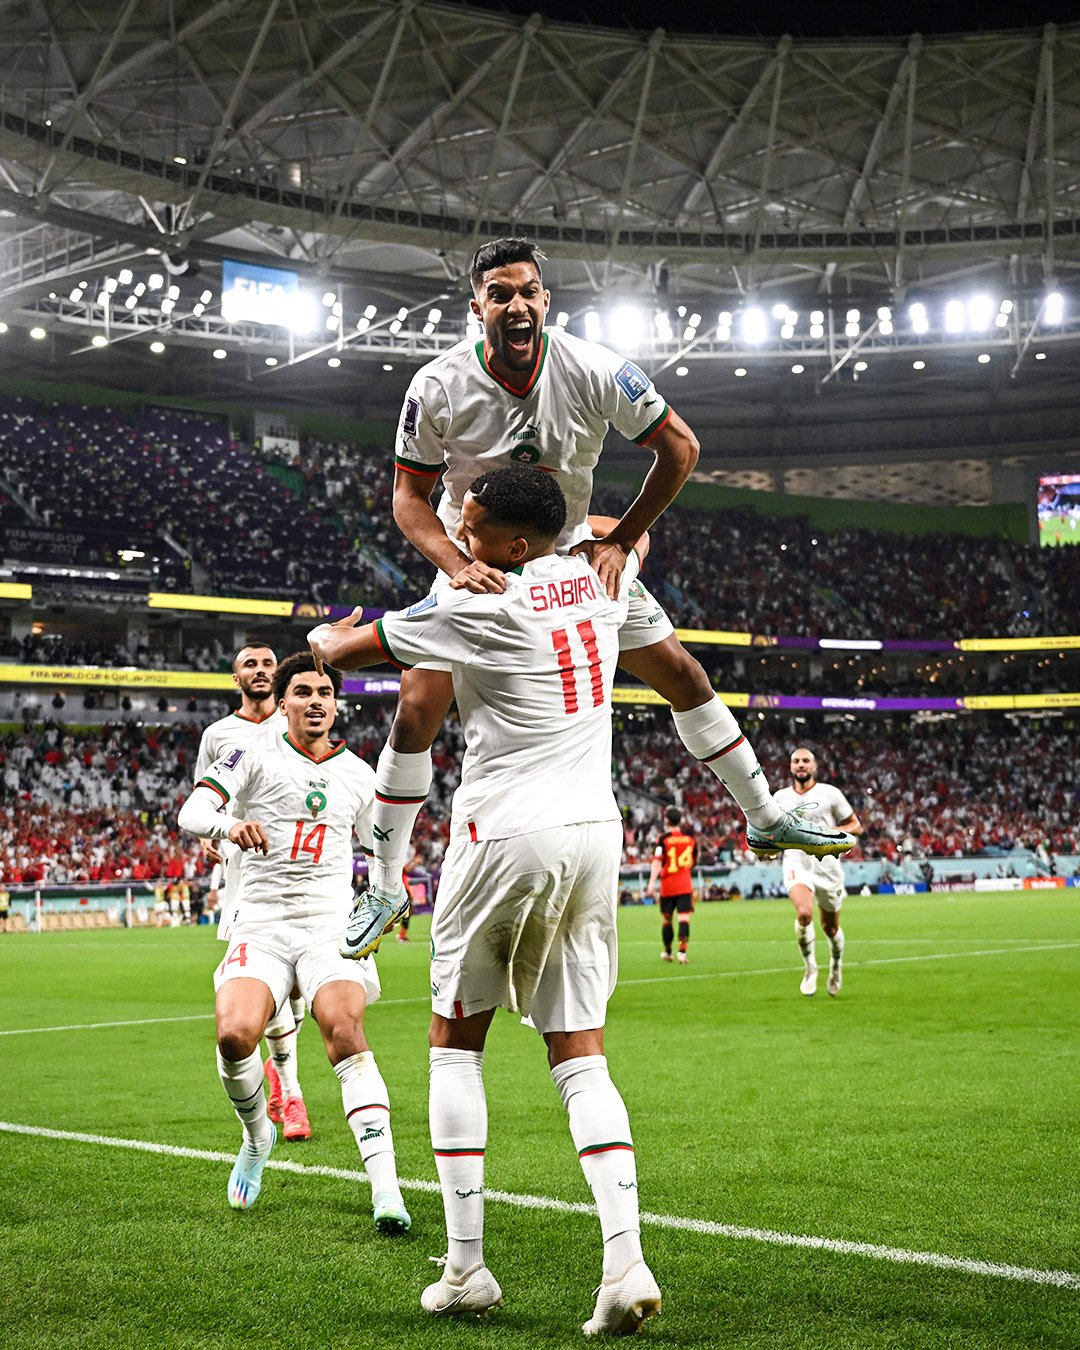 B R Football STUN BELGIUM FOR THEIR THIRD WIN IN WORLD CUP HISTORY